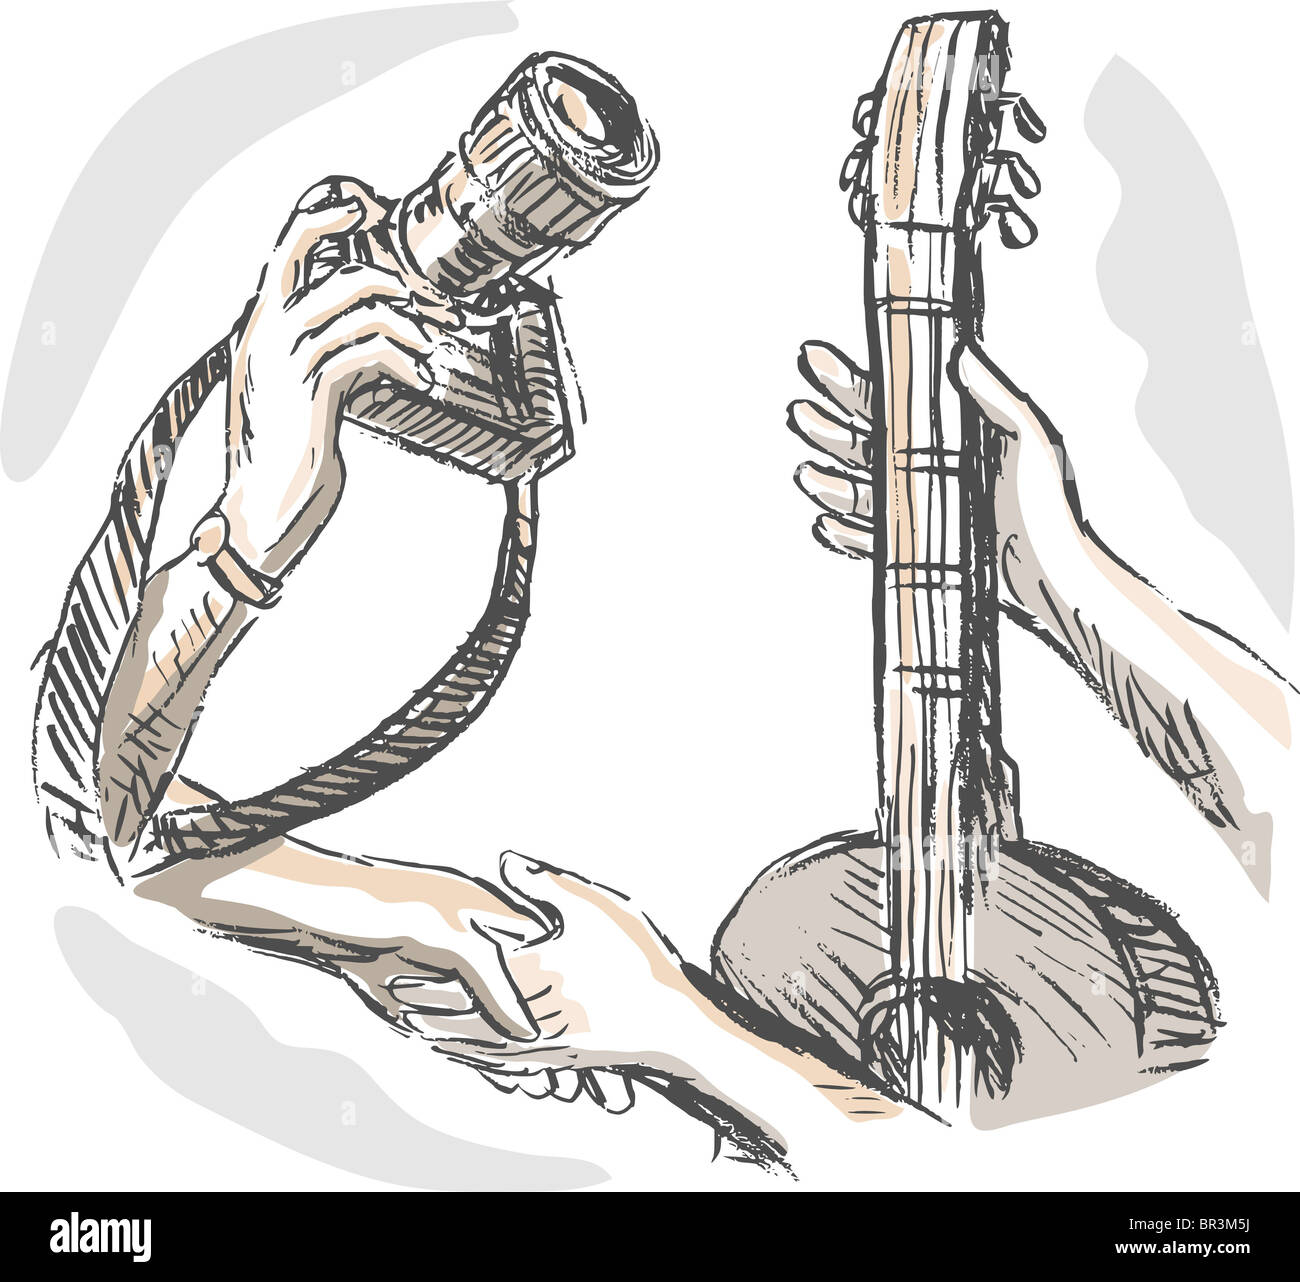 hand sketched illustration of Barter swapping hands with camera and guitar while shaking hands handshake Stock Photo